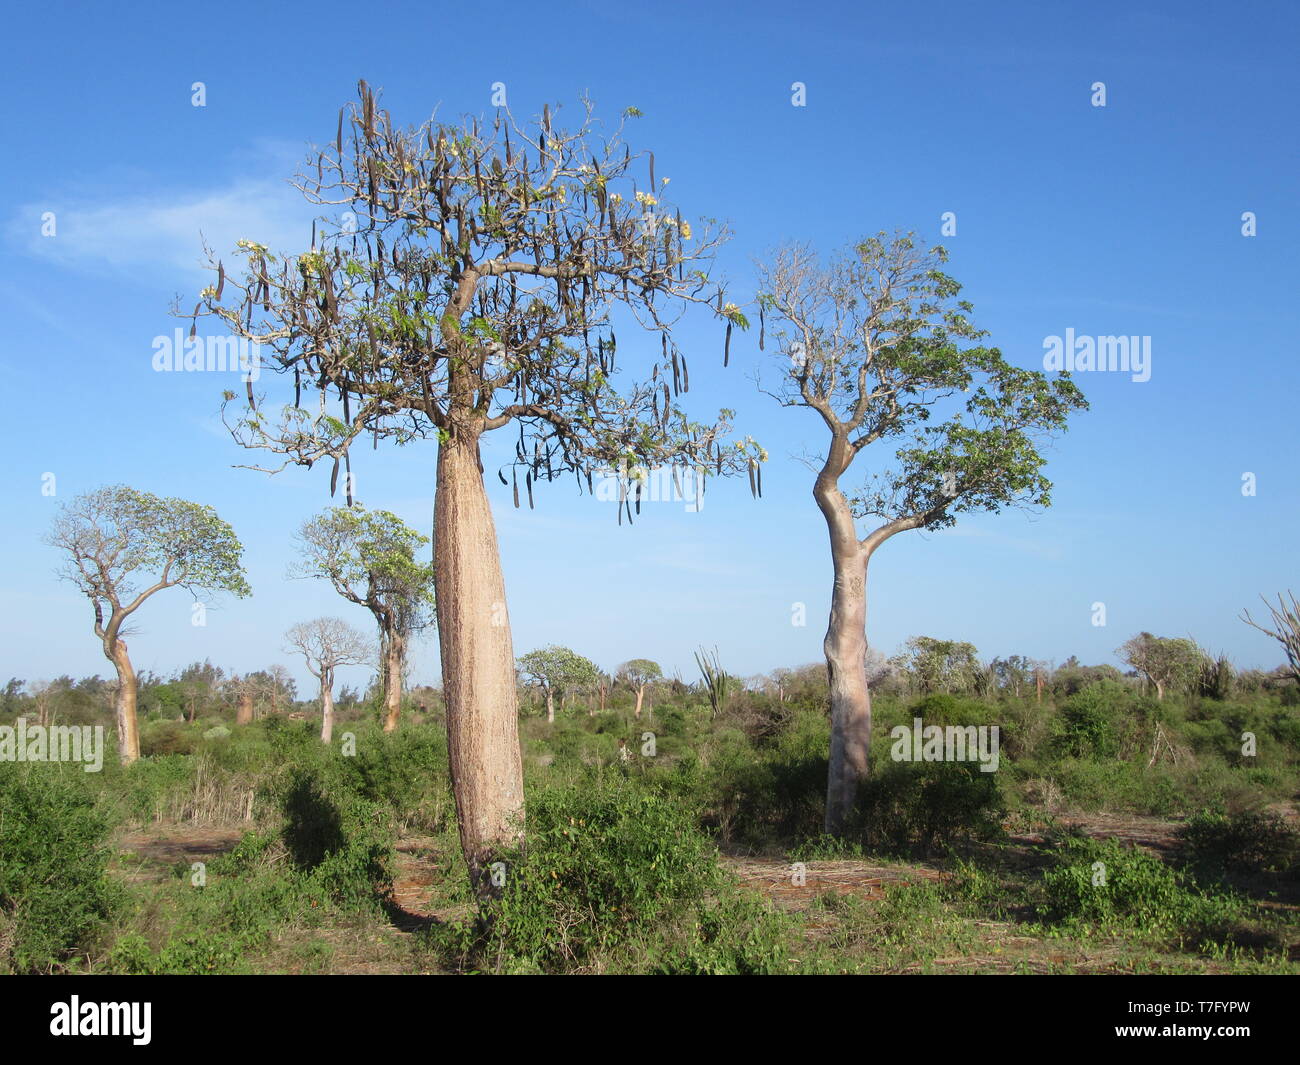 Huge baobab trees in spiny forest, Ifaty, westt coast of Madagascar. Stock Photo